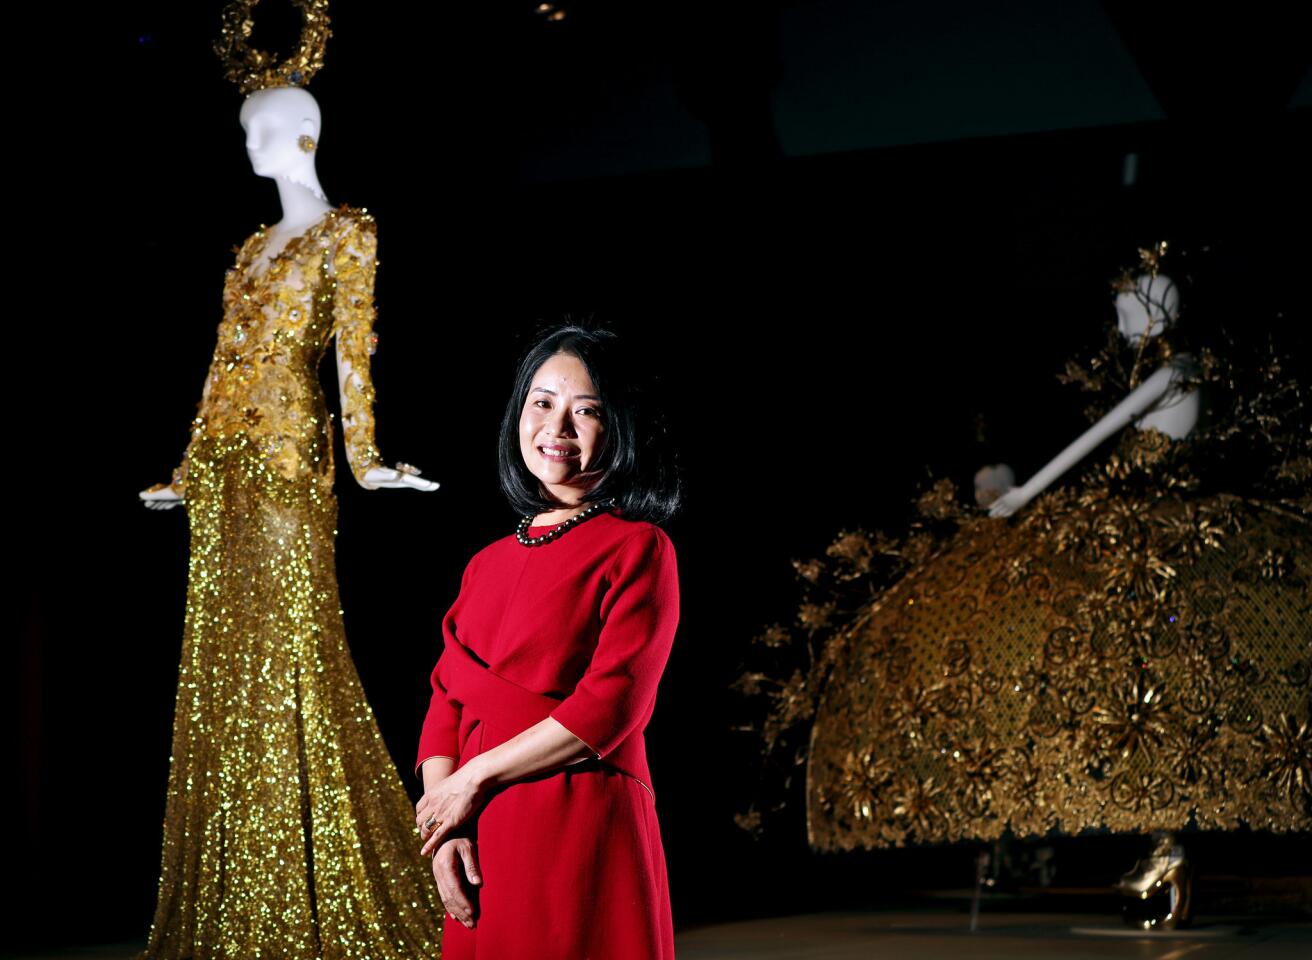 Photo Gallery: World-renowned couture designer Guo Pei at Bowers Museum